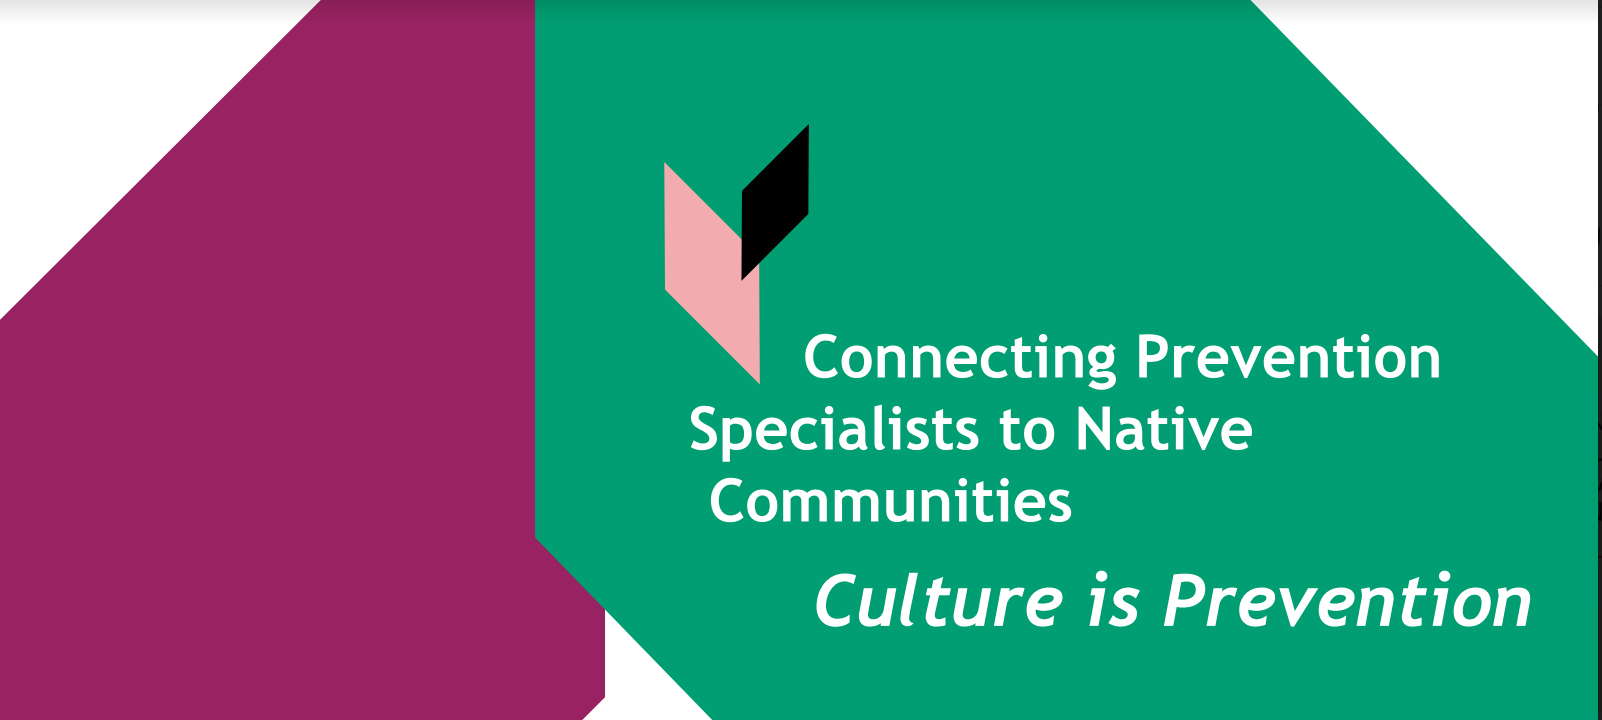 Connecting Prevention Specialist to Native Communities - Culture is Prevention cover